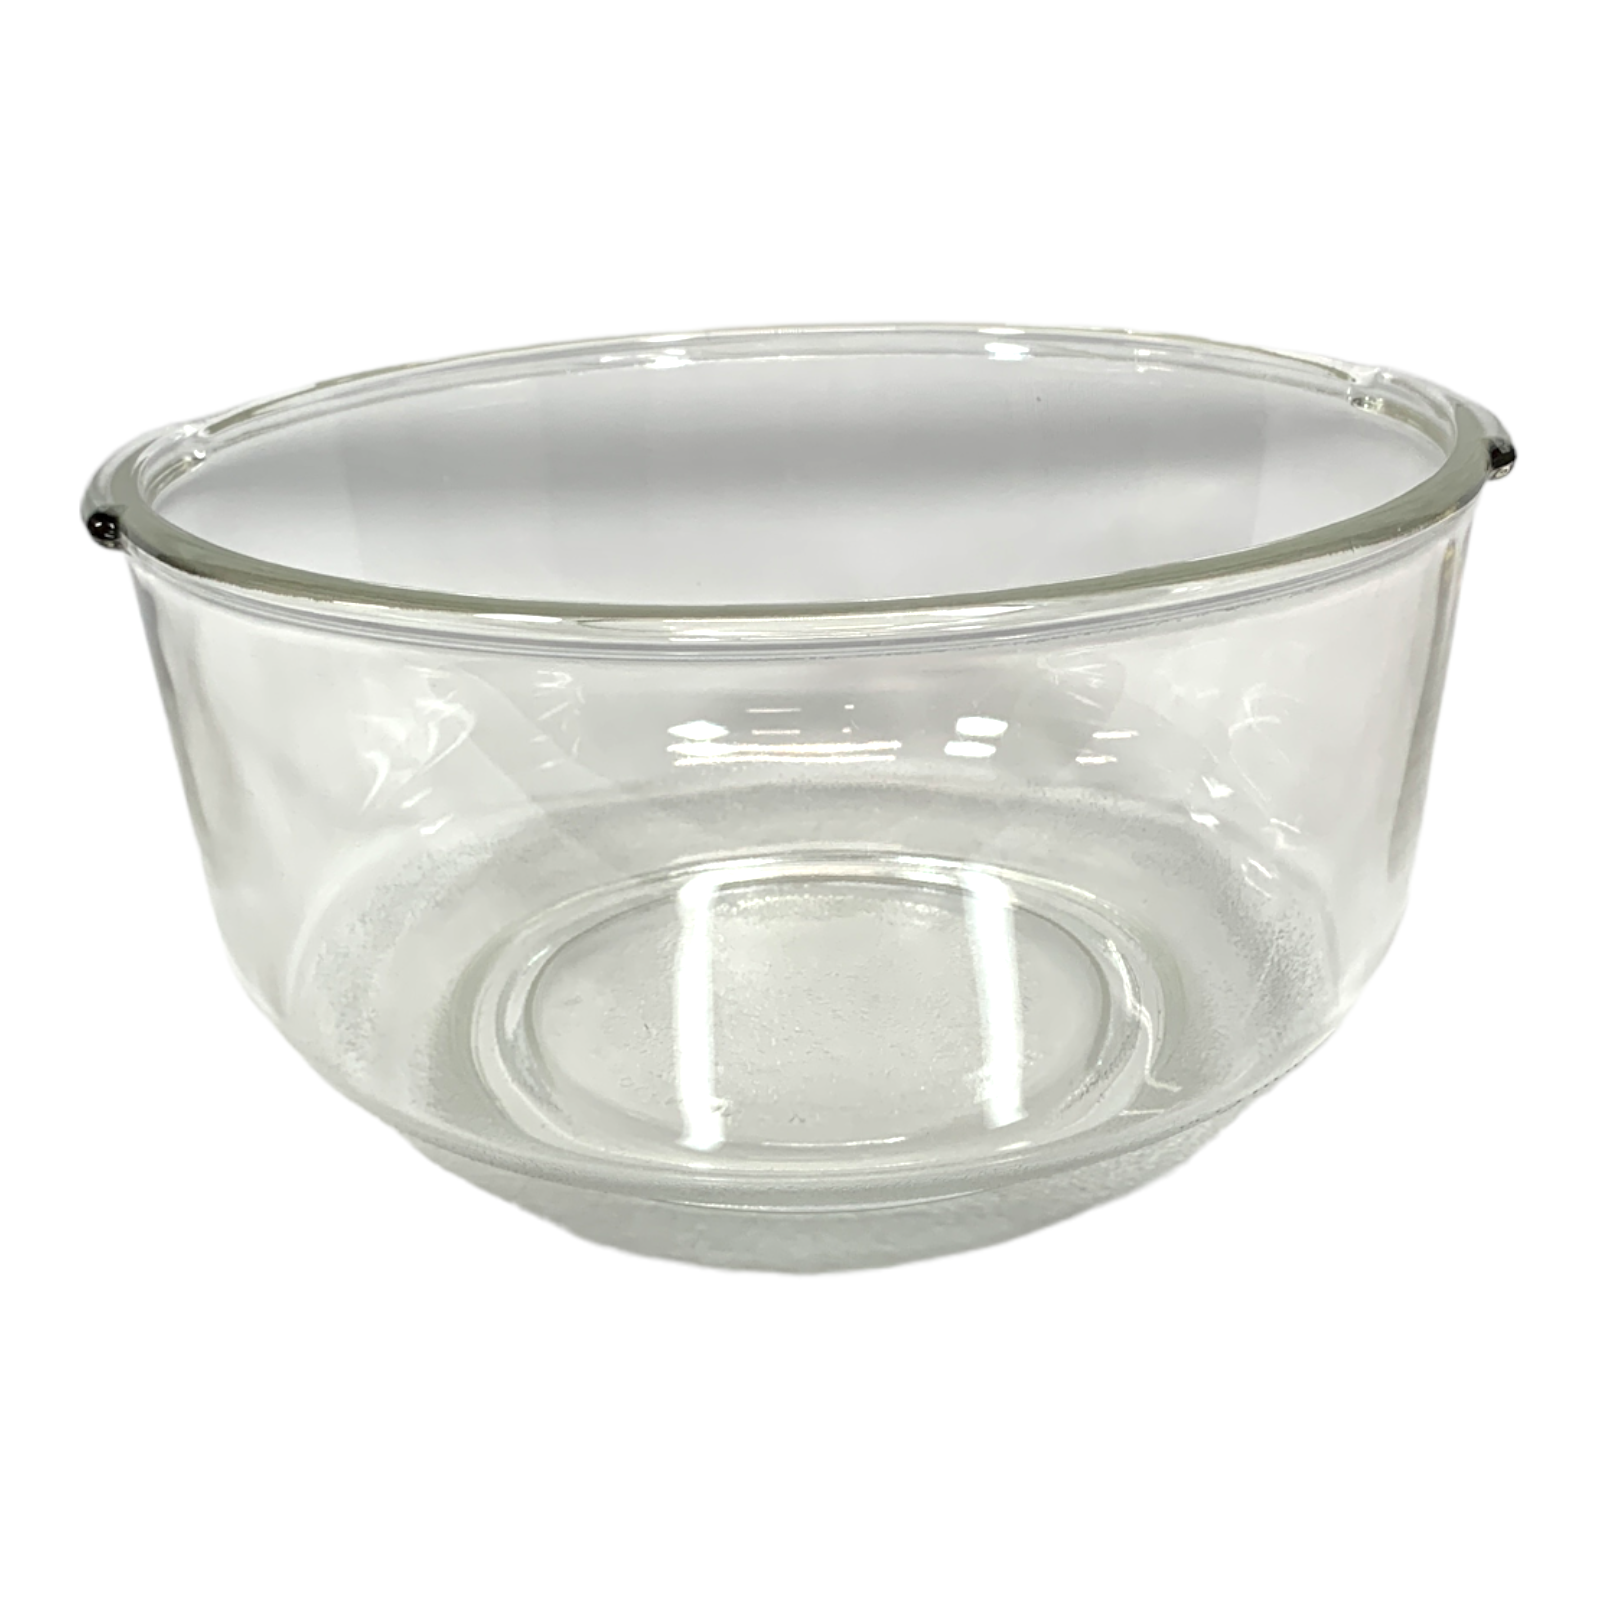 Sunbeam Mixmaster  9"  Glass Bowl Only  01401 01960 2356 2358 2359 2360 - $18.81